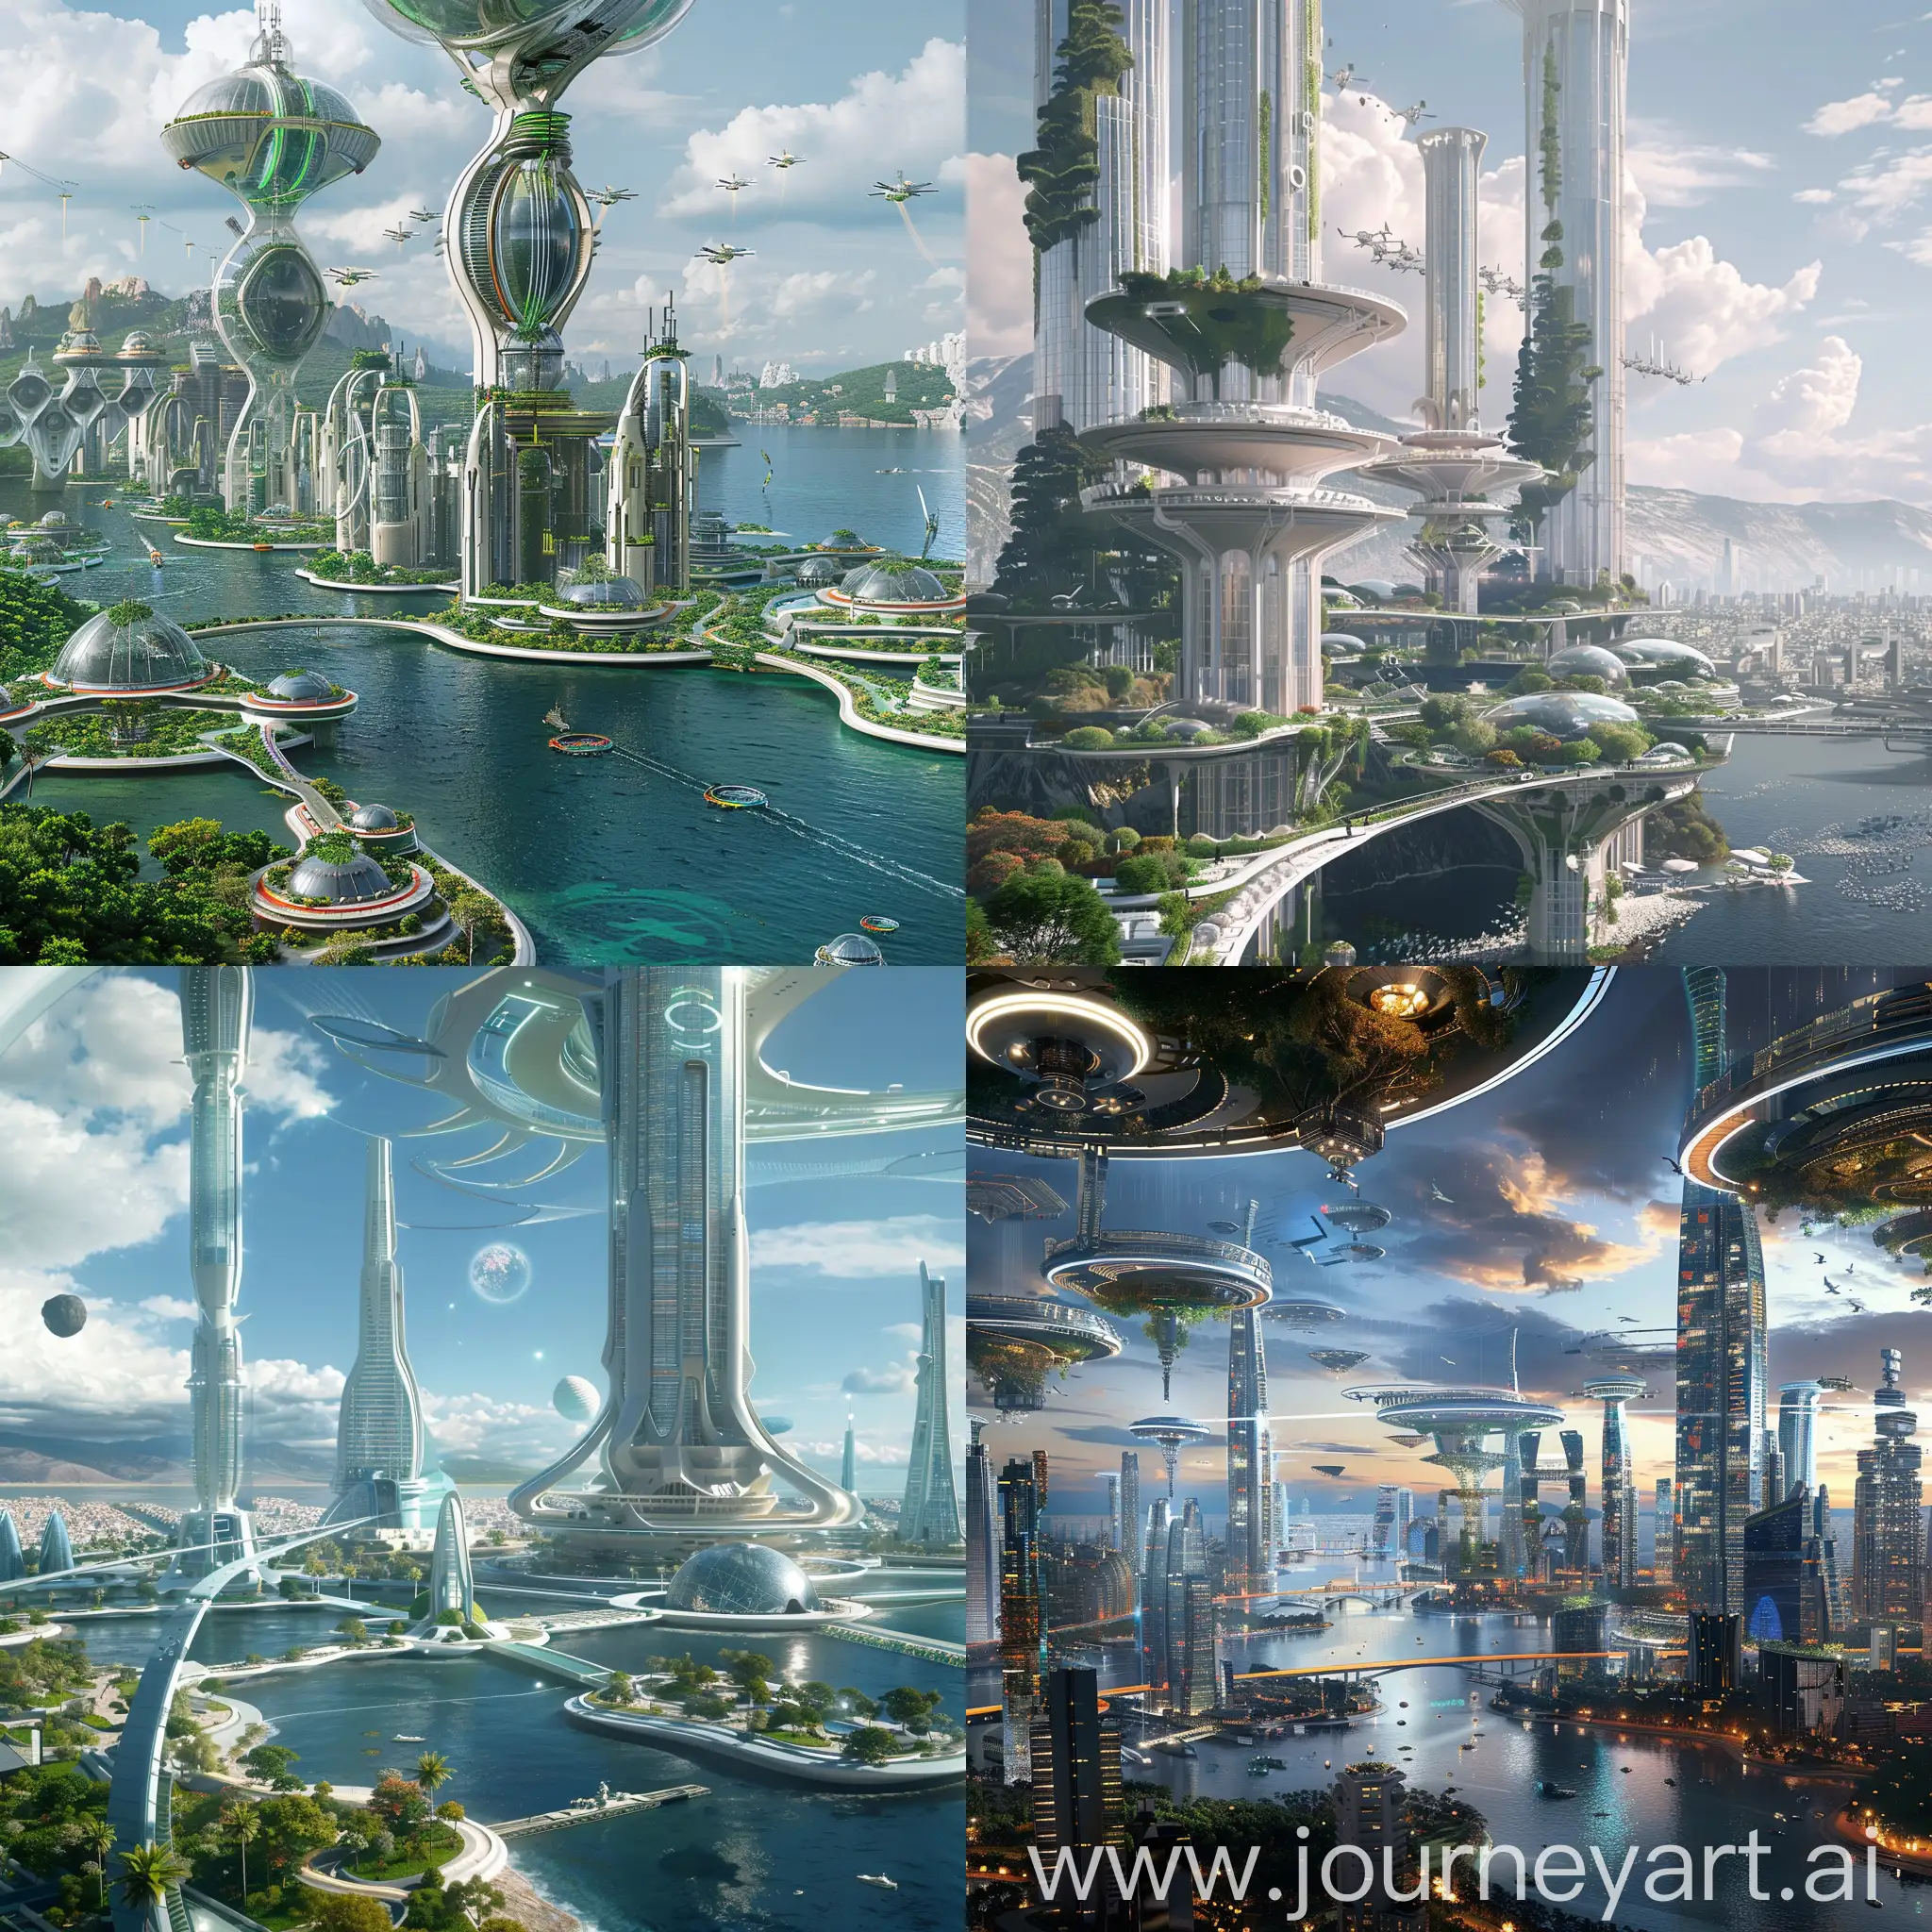 Sci-Fi Vladivostok, Quantum Core Reactors, Atmospheric Purifiers, Hyperloop Transit Systems, AI-Managed Vertical Farms, Nano-structured Buildings, Augmented Reality Interfaces, Subterranean Aquatic Systems, Waste Recycling Converters, Climate Control Domes, Holographic Data Archives, Dynamic Skinscrapers, Floating Energy Platforms, Drone Traffic Networks, Eco-Bridges, Interactive Public Art, Sea Gates, Space Elevator, Urban Greenways, Holographic Billboards, Robotic Maintenance Swarms, In Unreal Engine 5 Style --stylize 1000